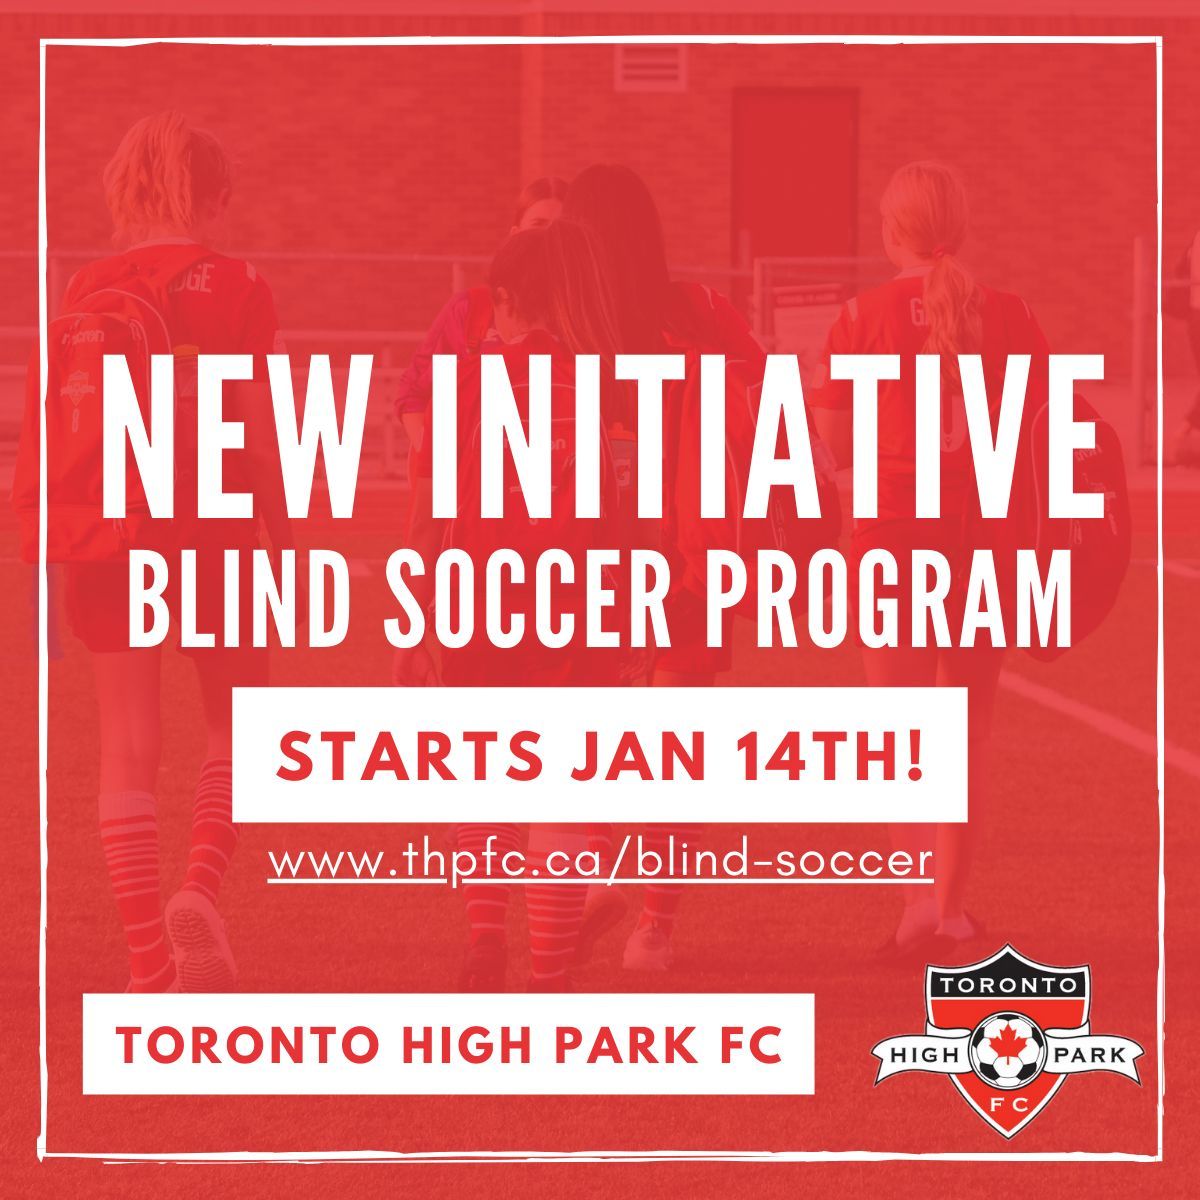 🌟 Join us in embracing the beautiful game without sight boundaries! THPFC is proud to announce our Blind Soccer Program – where passion meets inclusion! On January 14th, we kick off a journey of teamwork, skill & endless possibilities. Learn more: thpfc.ca/blind-soccer/ #THPFC